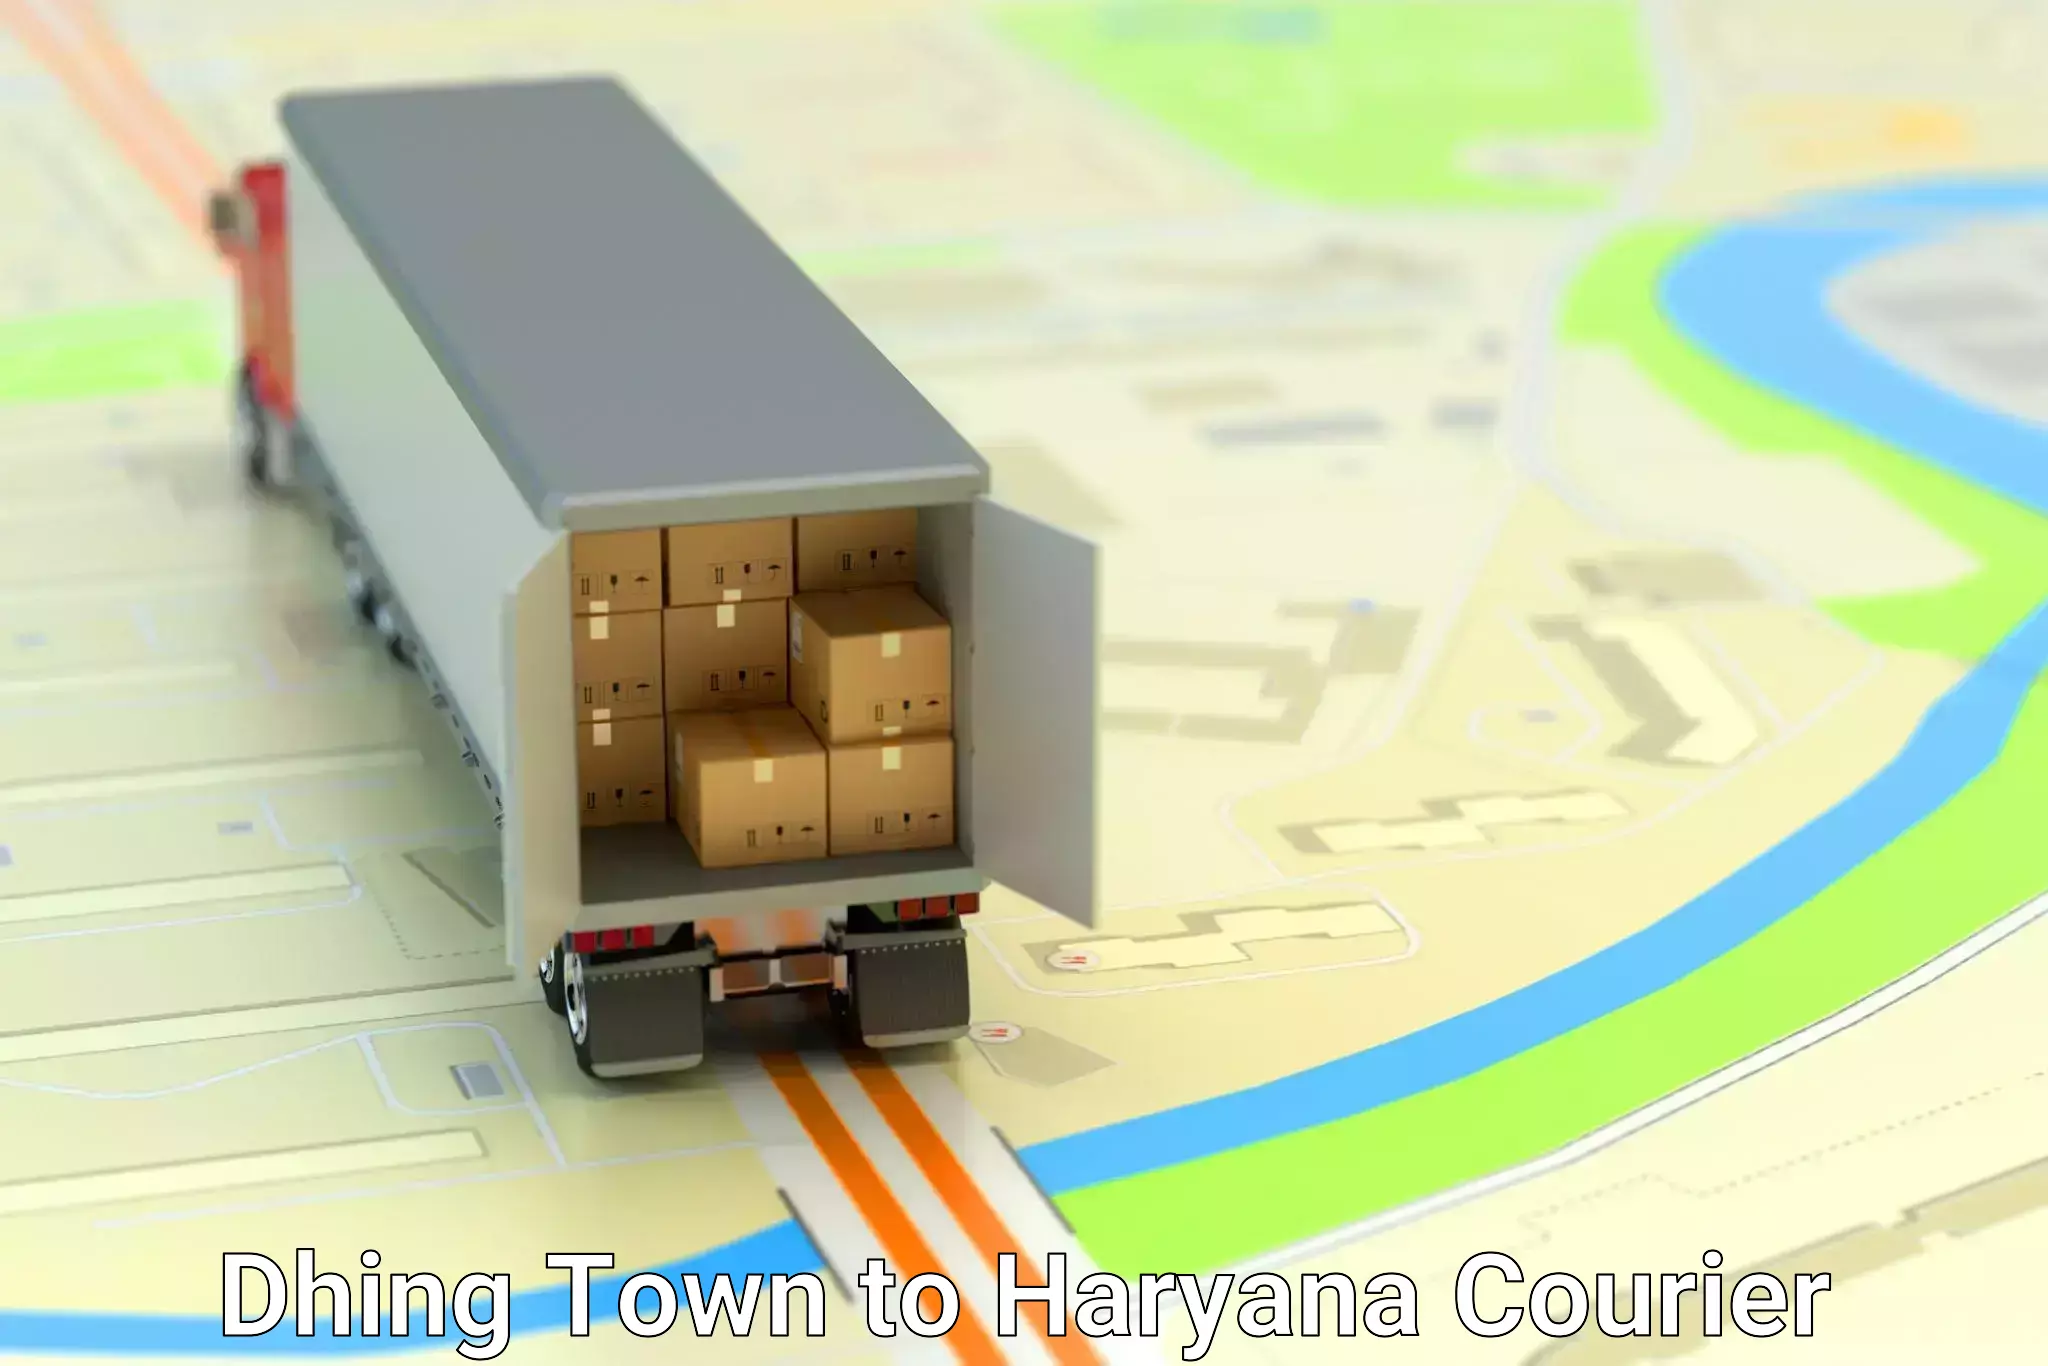 Courier service comparison Dhing Town to Haryana